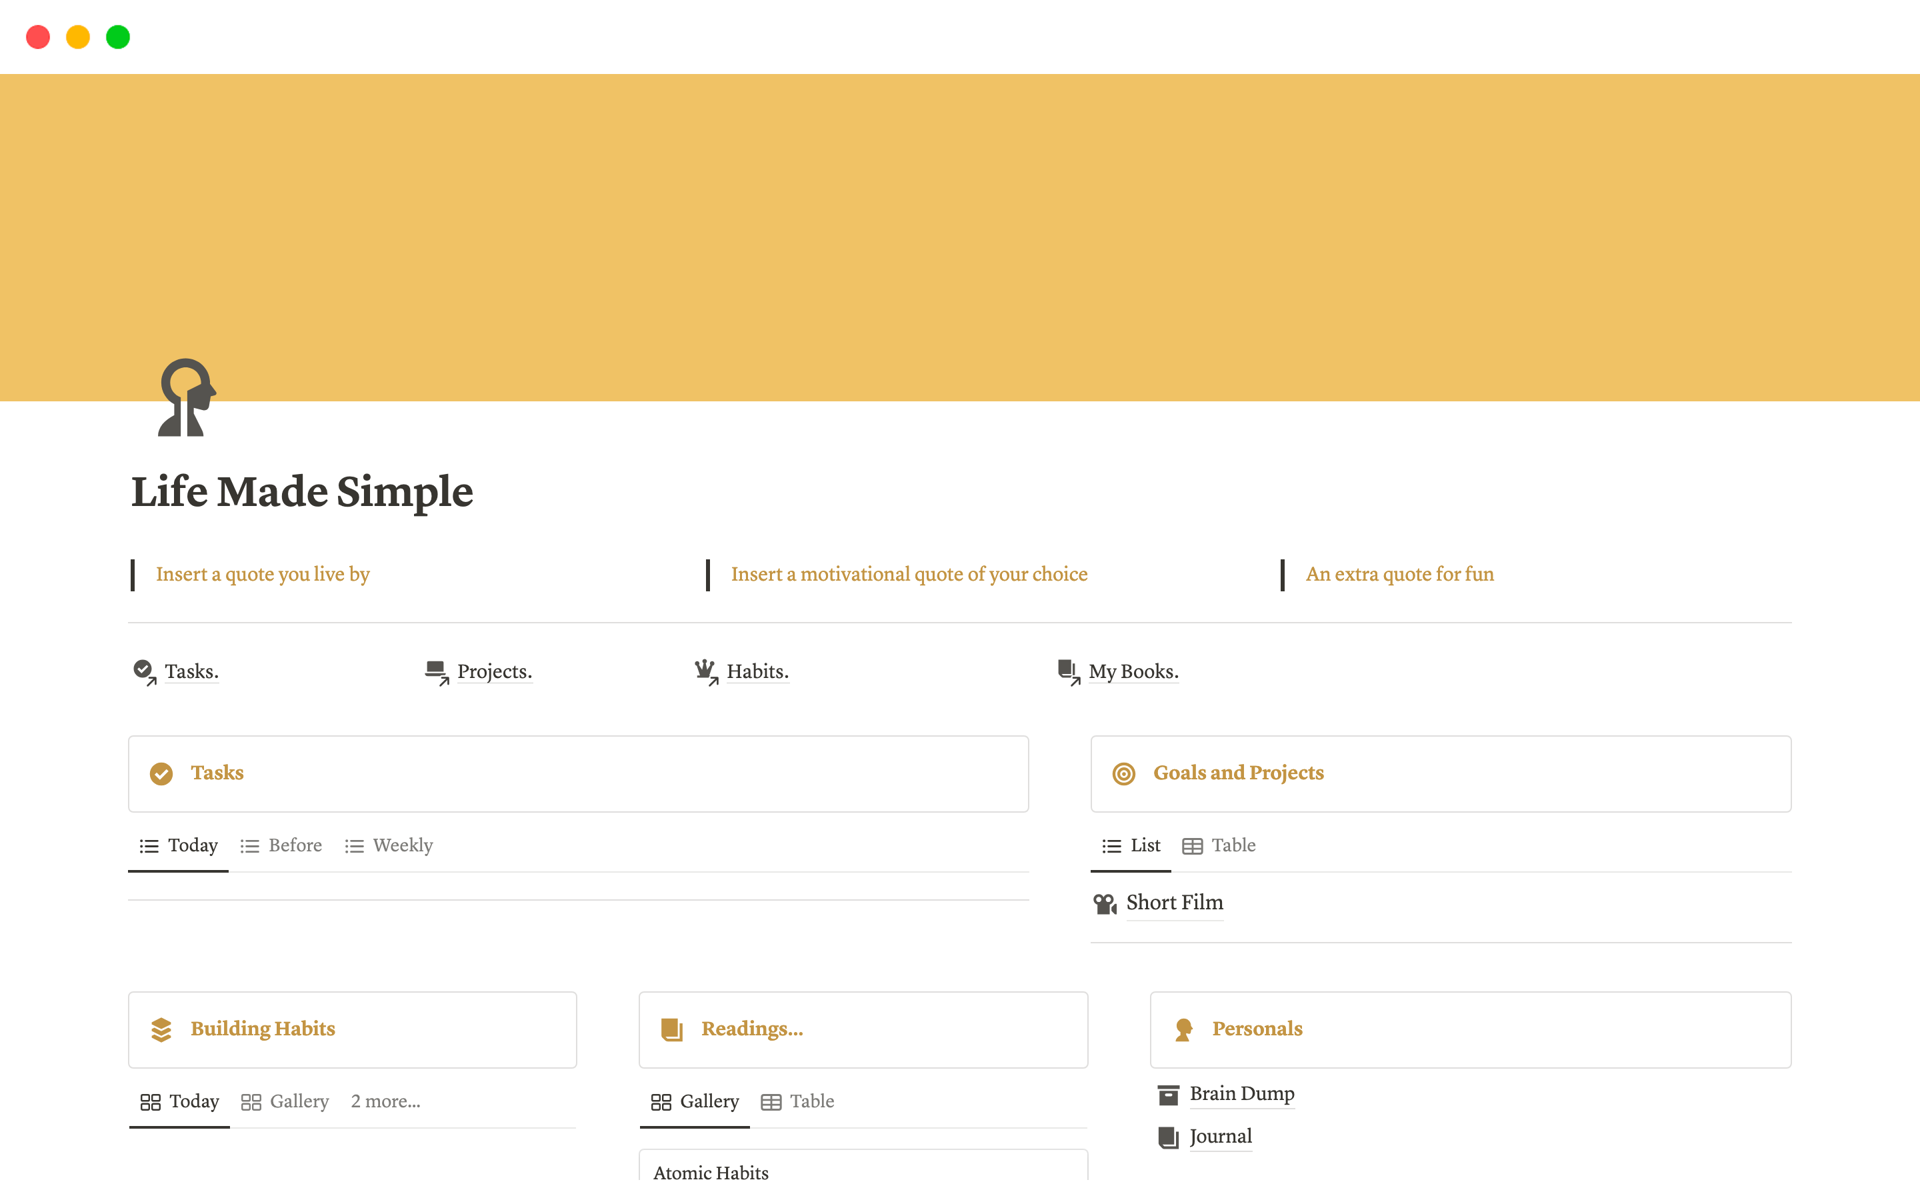 This notion template is designed to help you manage all the essential aspects of your life, which involves your daily Tasks, Projects, Habits, and Readings, brought to you in one centralized location.